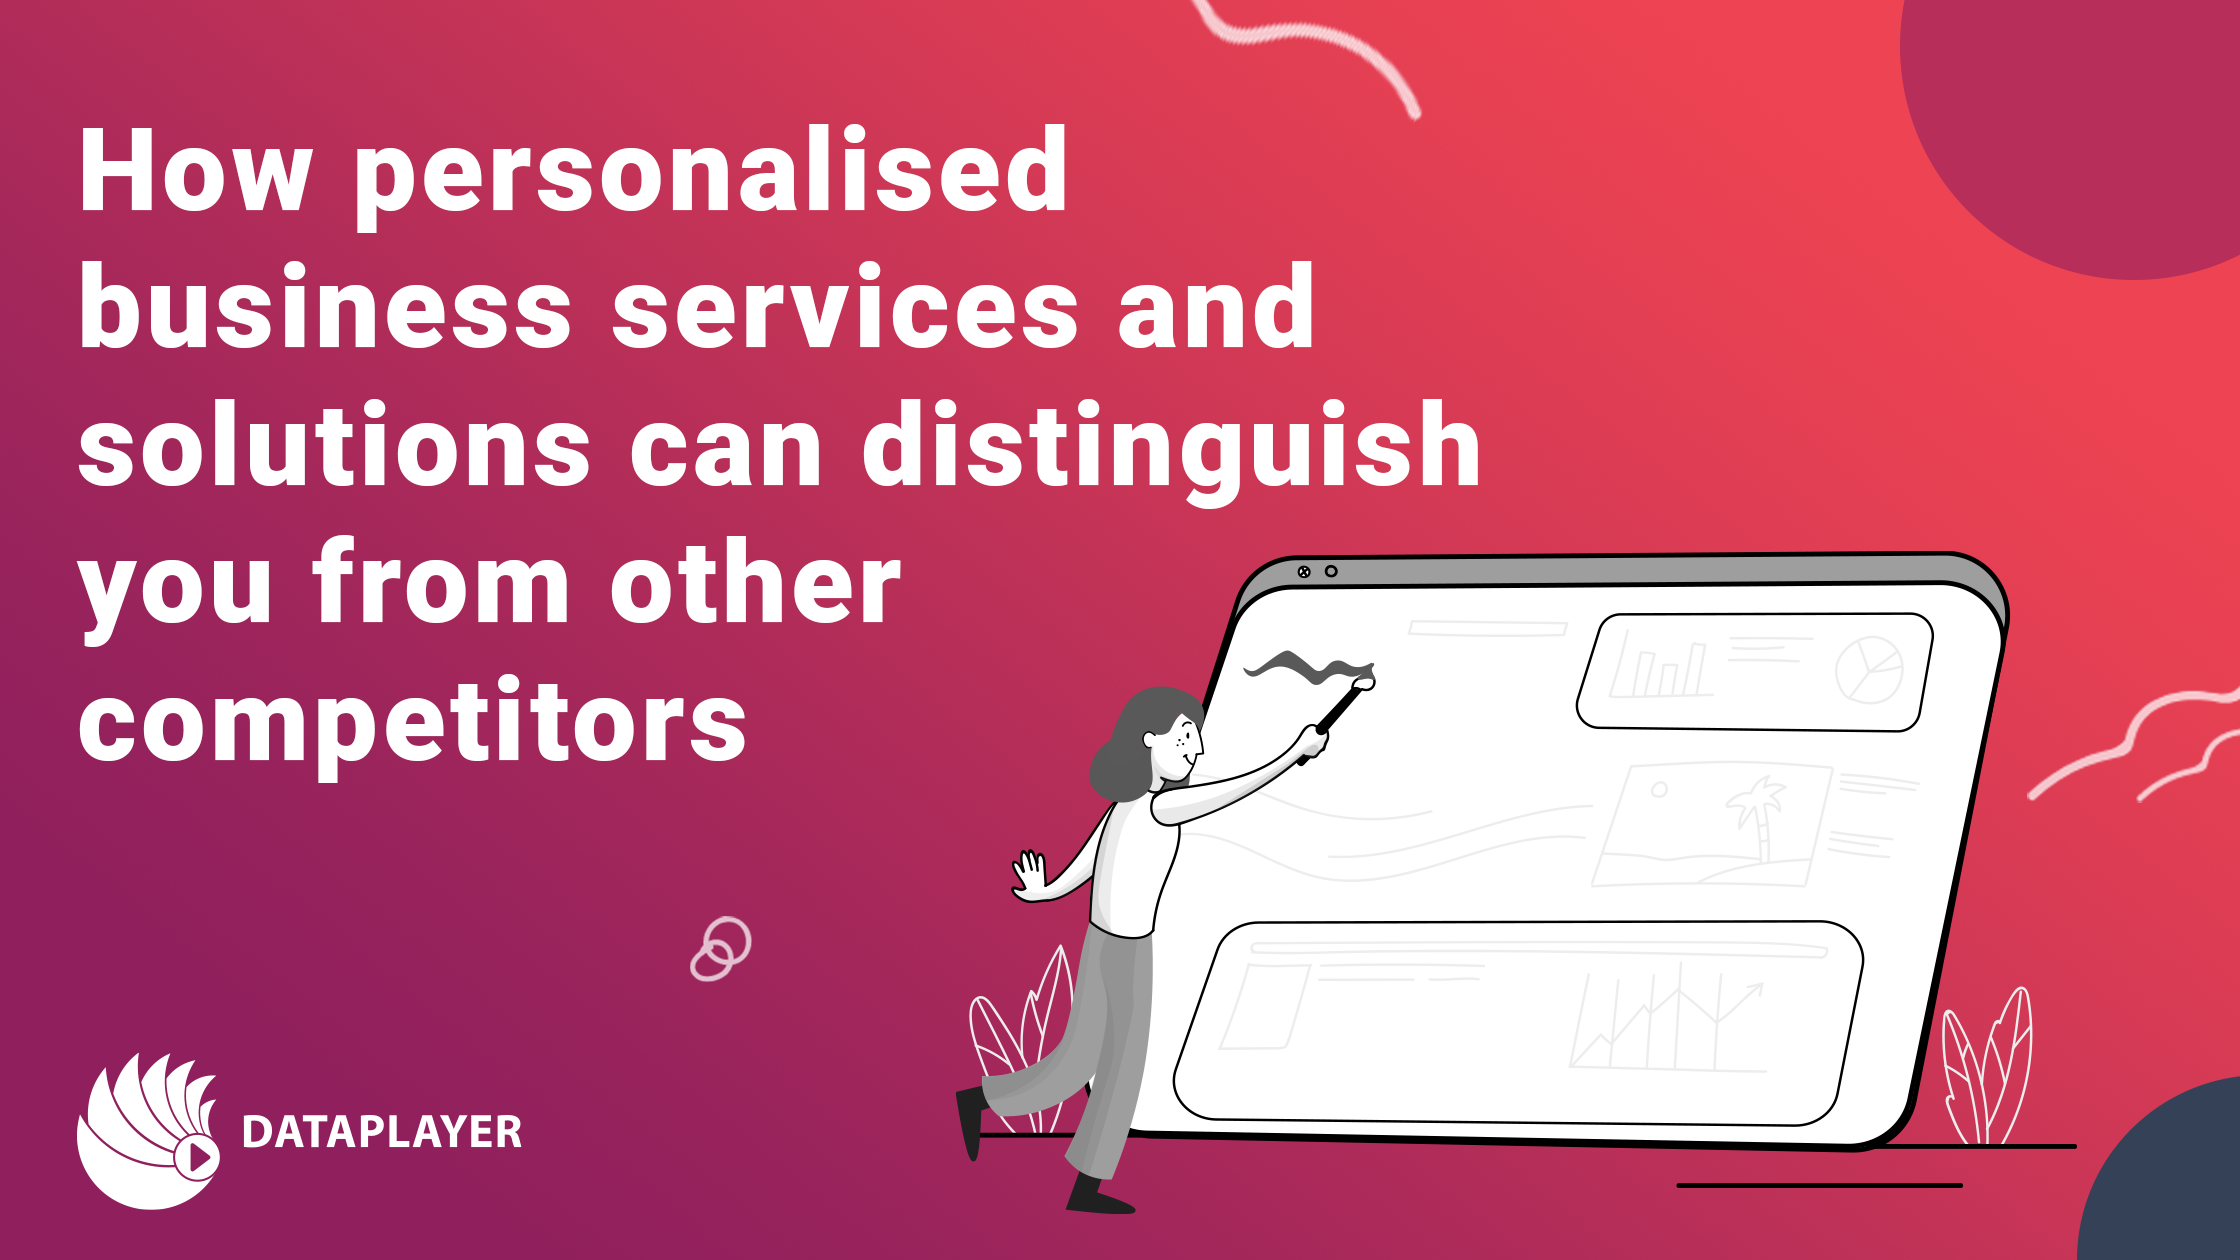 How personalised business services and solutions can distinguish you from other competitors